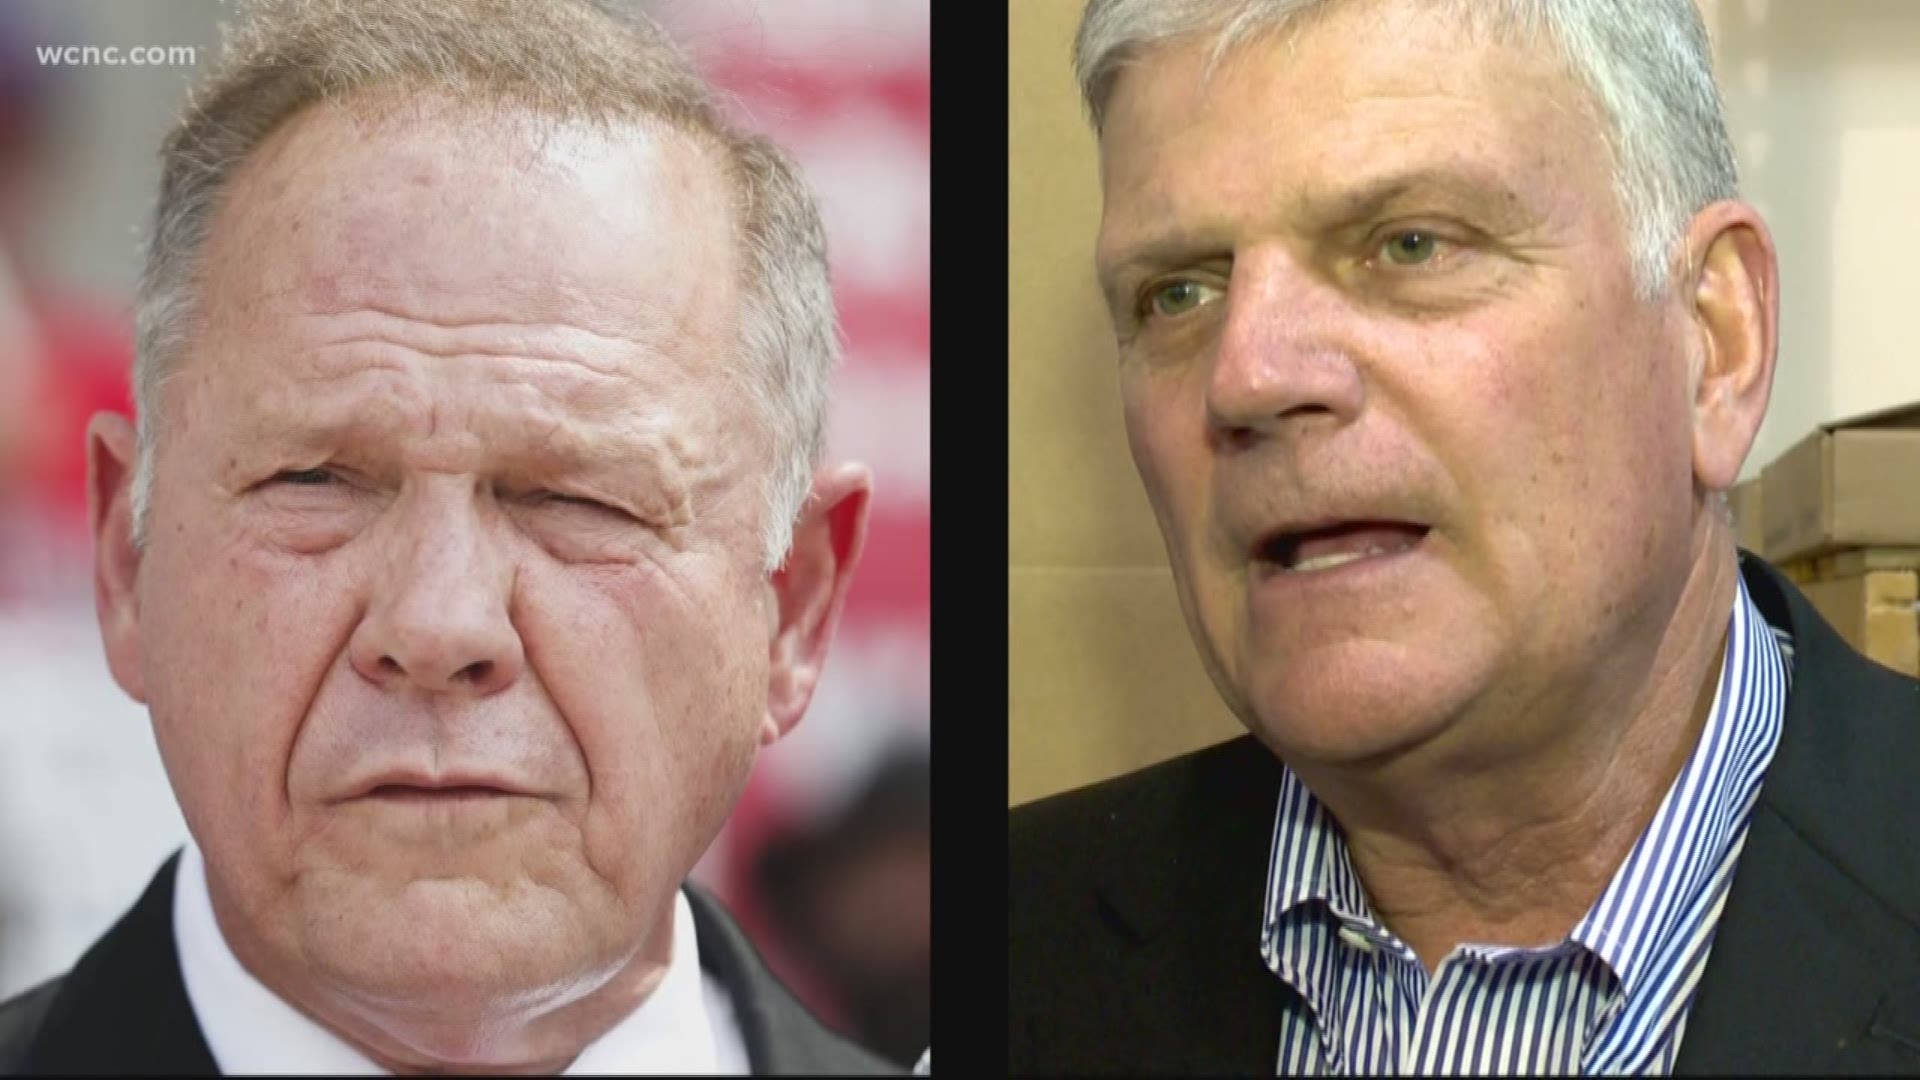 Franklin Graham defended Alabama Senate candidate Roy Moore, comparing allegations of sexual misconduct to former President Bill Clinton.